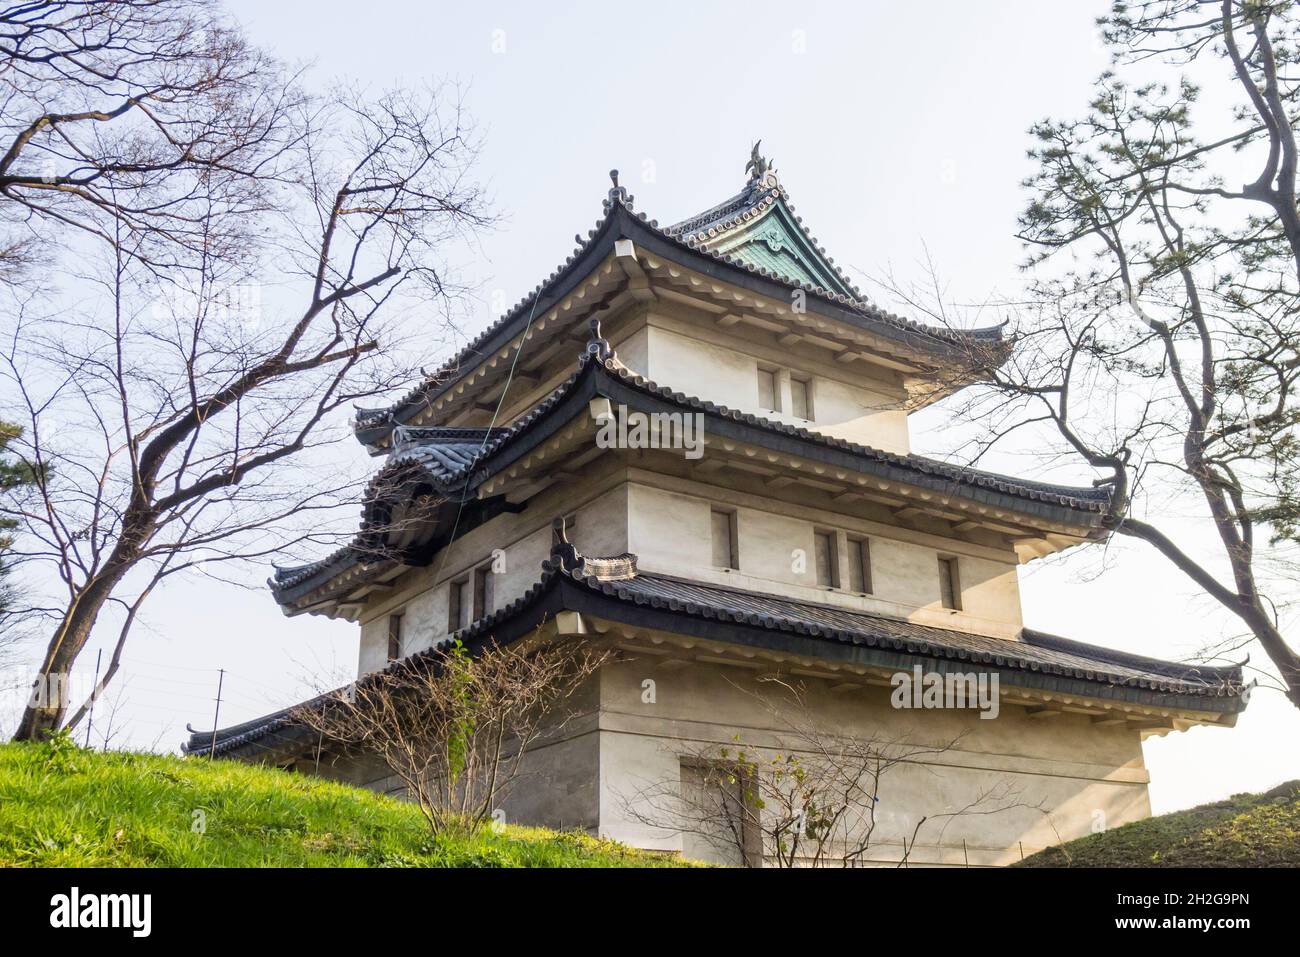 Fujimi Yagura on The East Gardens of The Imperial Palace in Tokyo Stock Photo